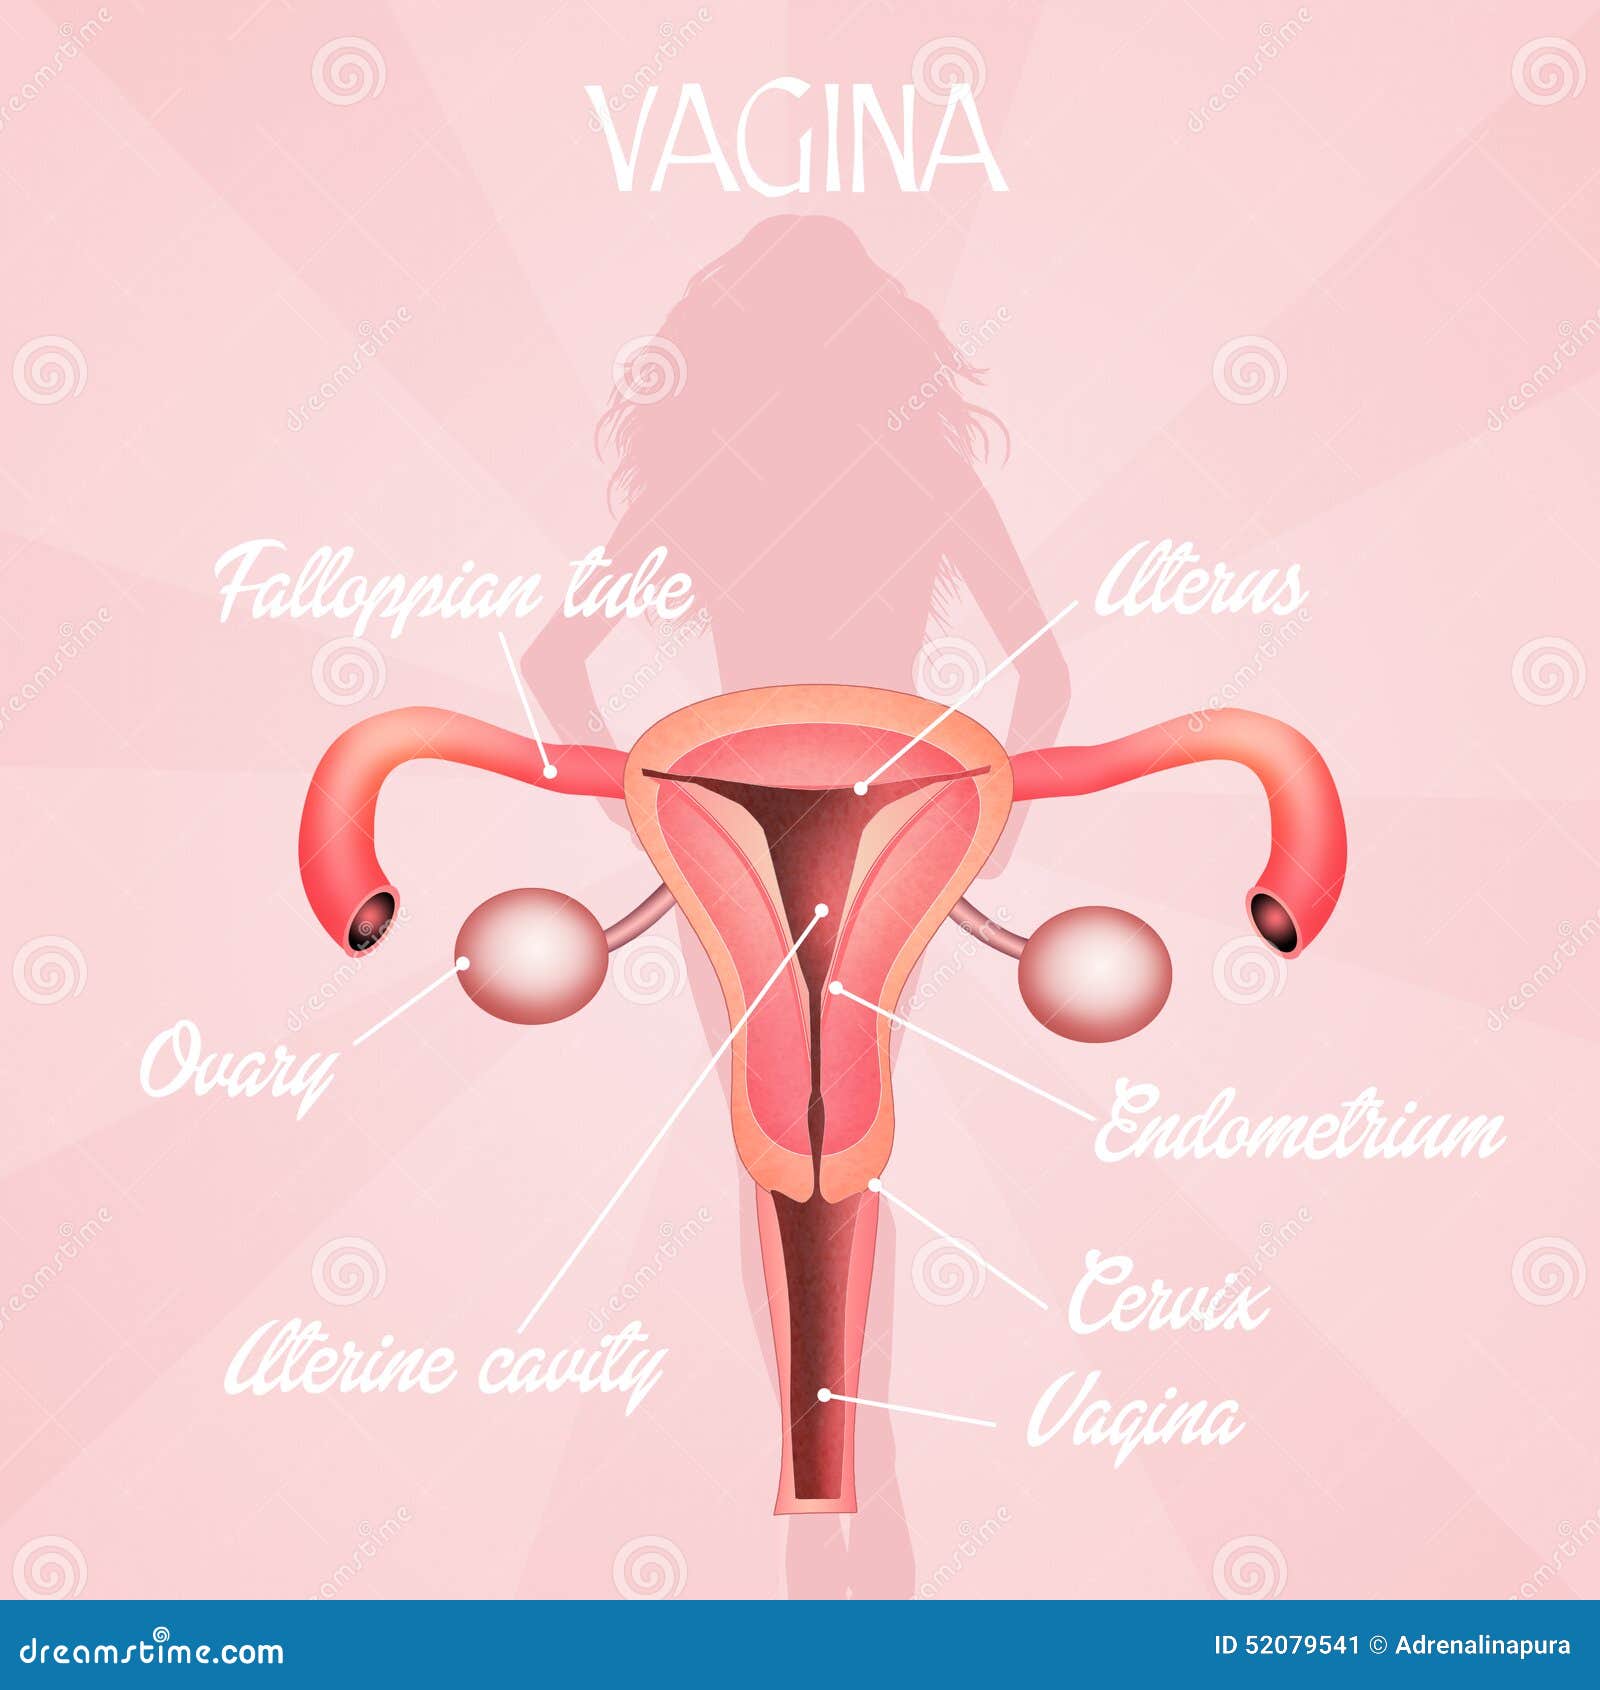 Vagina Video And Picture Free Download 10